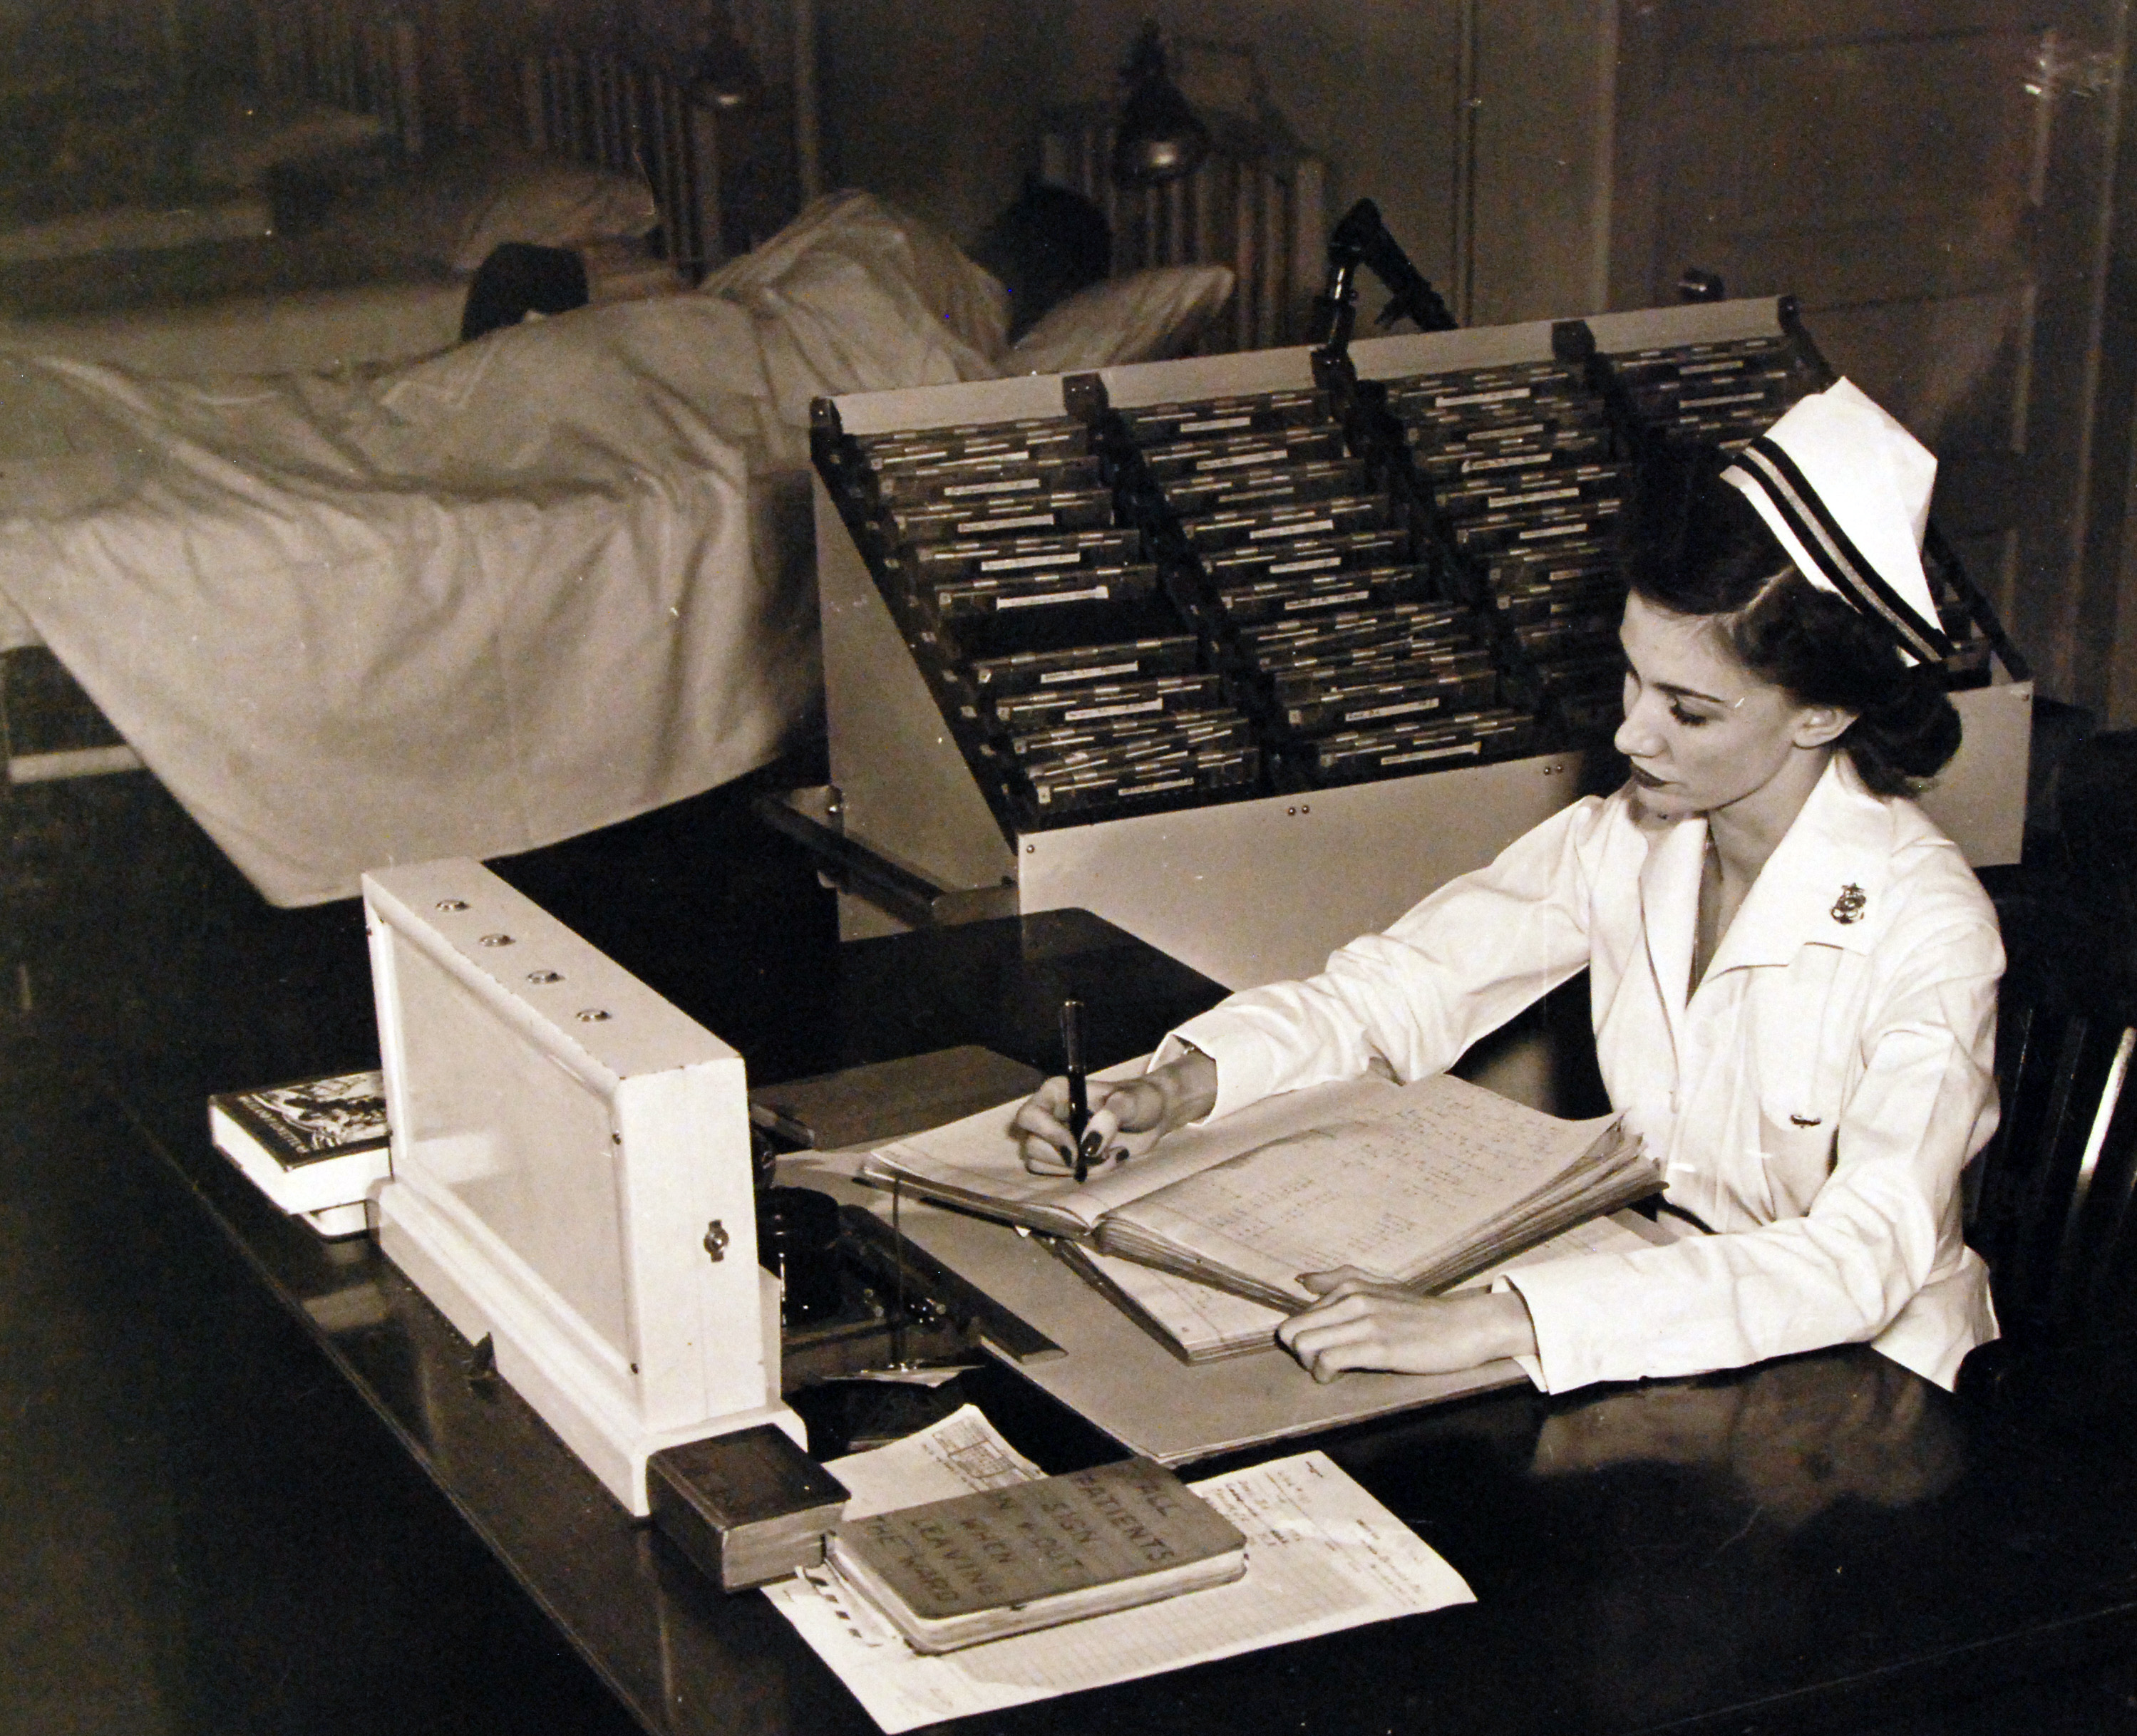 Navy Nurse Keeps the Books in Order